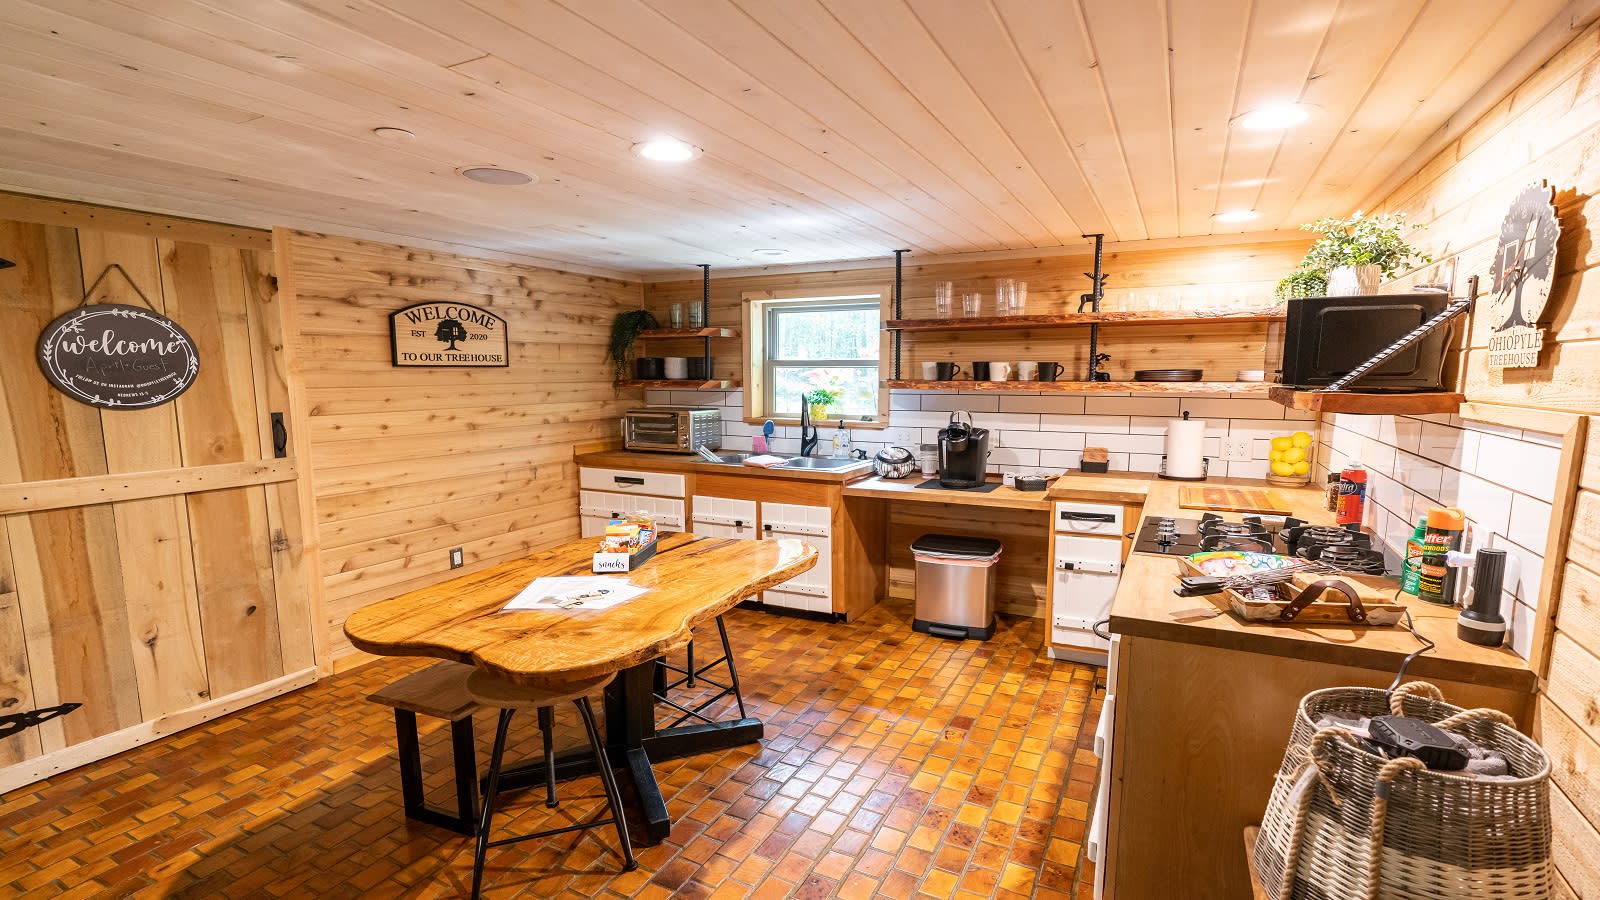 Ohiopyle Treehouse offers an unforgettable stay